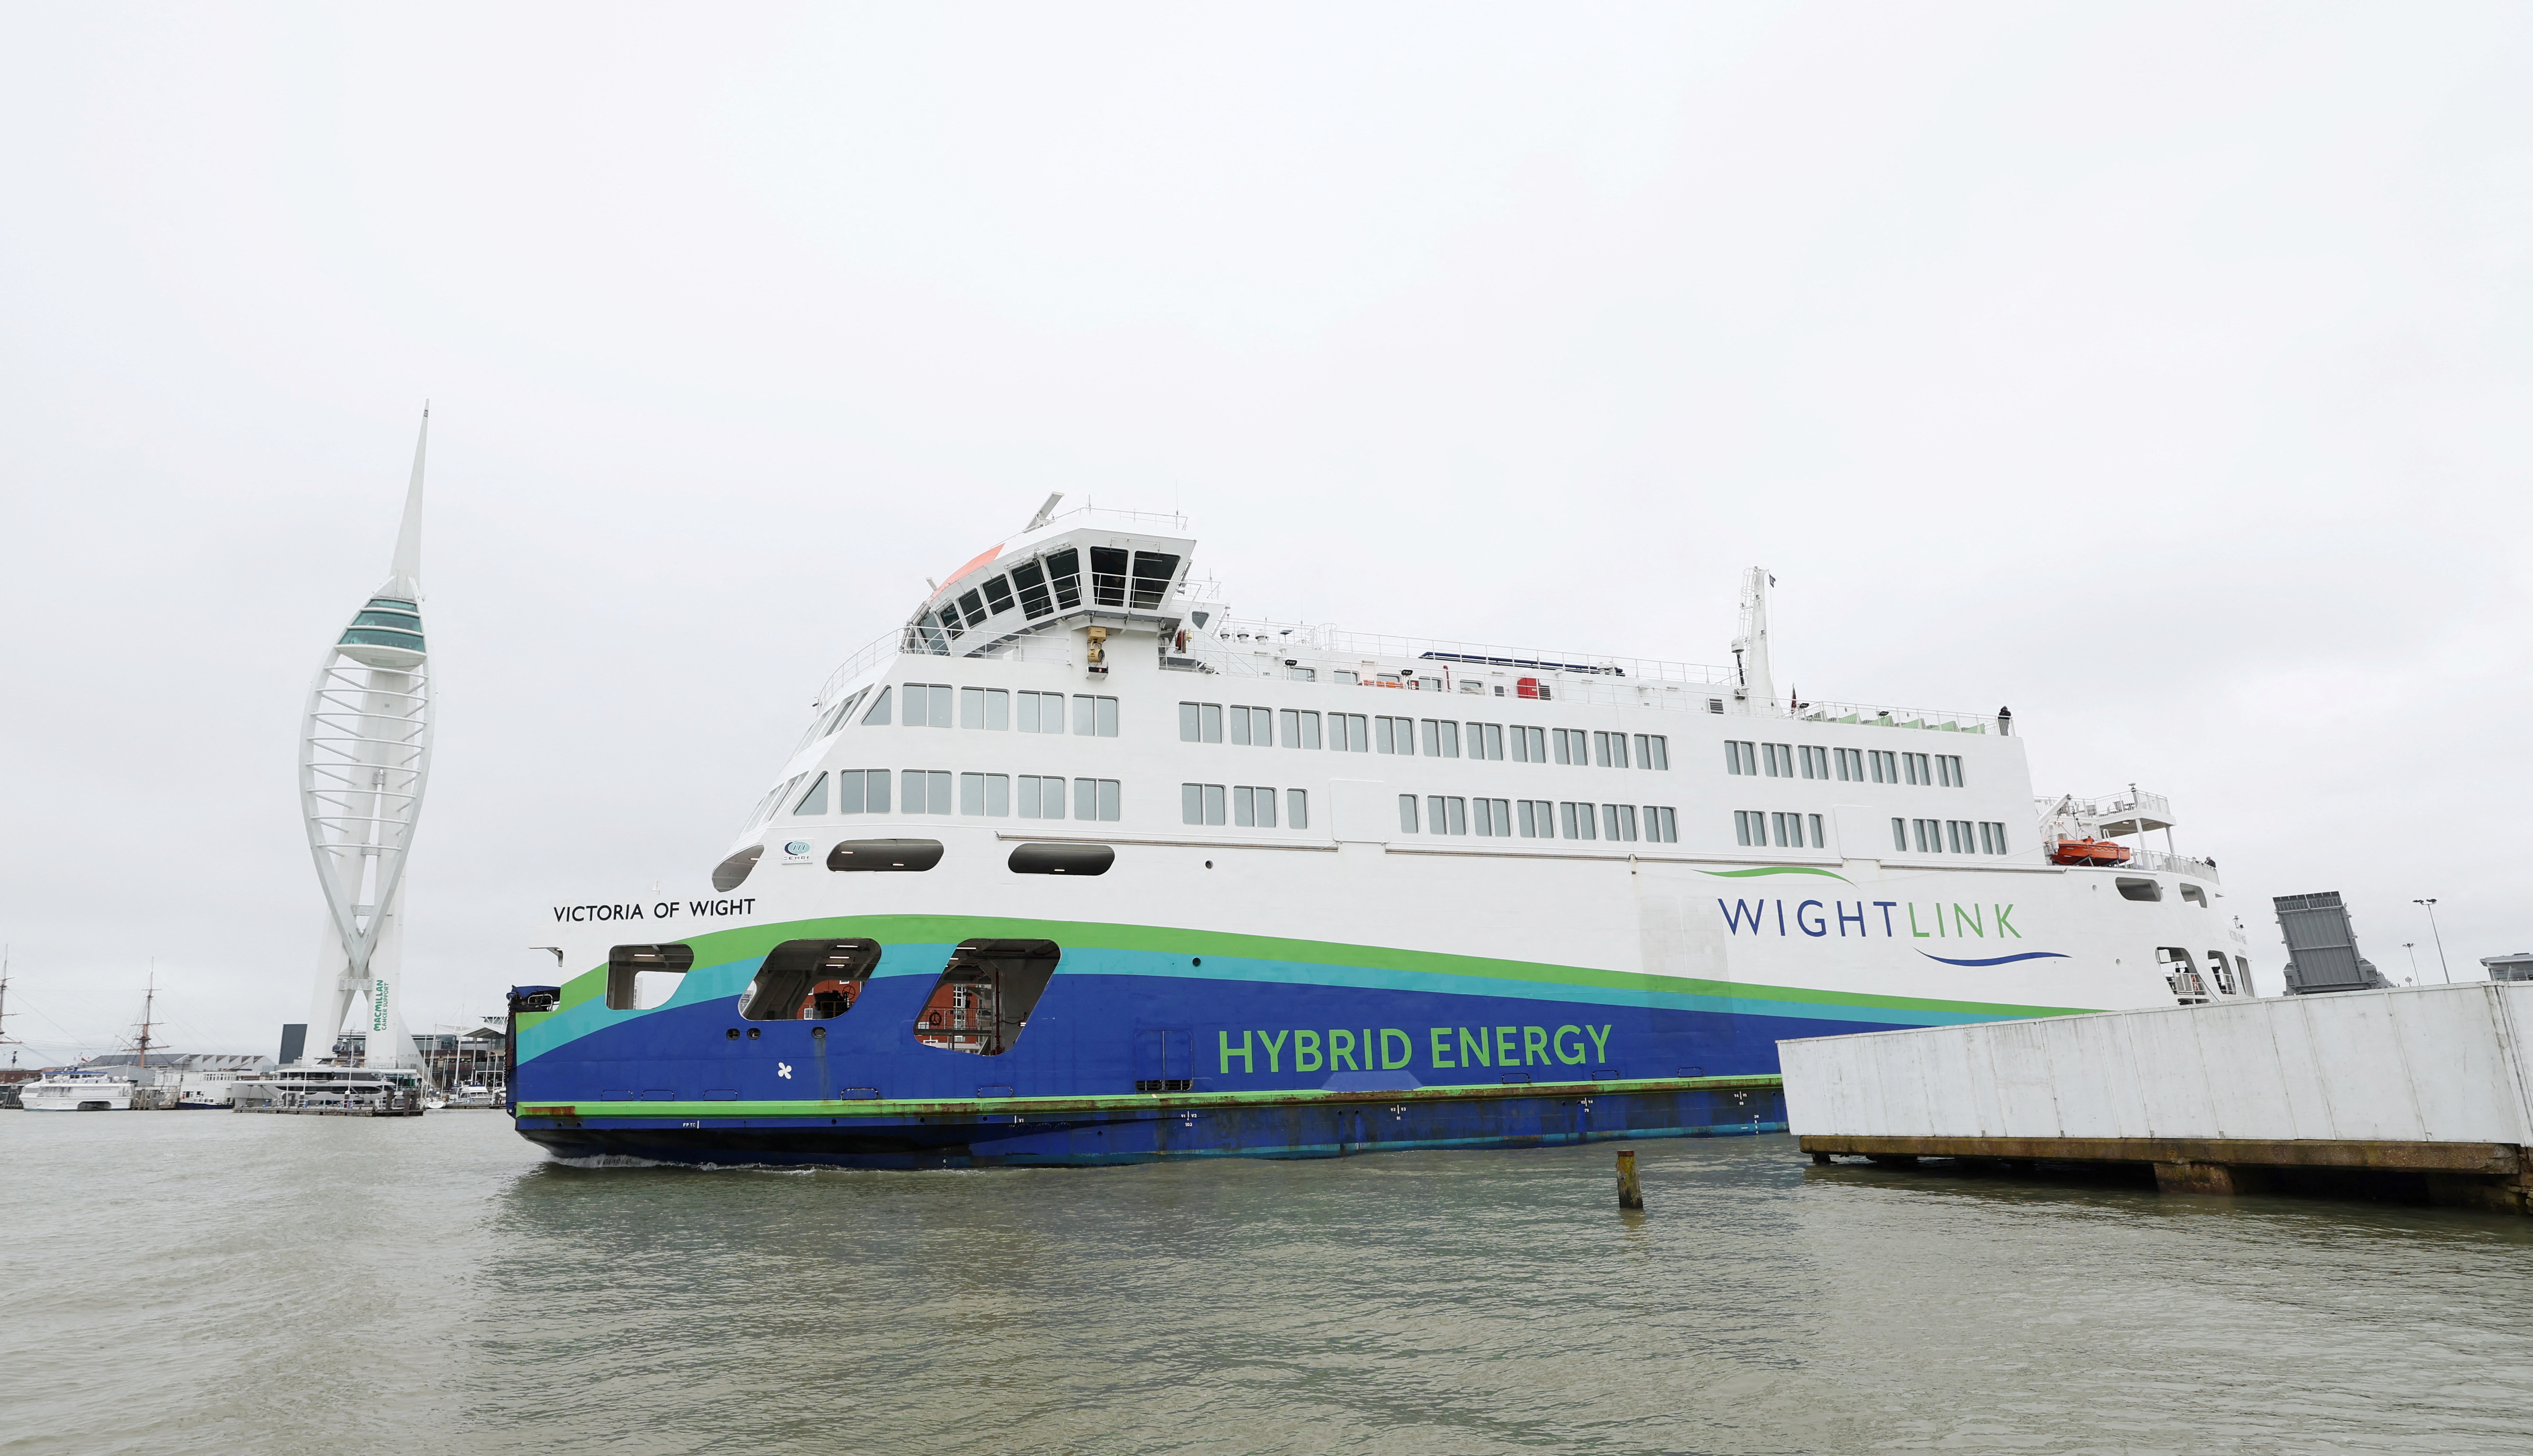 Wightlink's Victoria of Wight hybrid energy ferry passes by Spinnaker Tower just outside Portsmouth